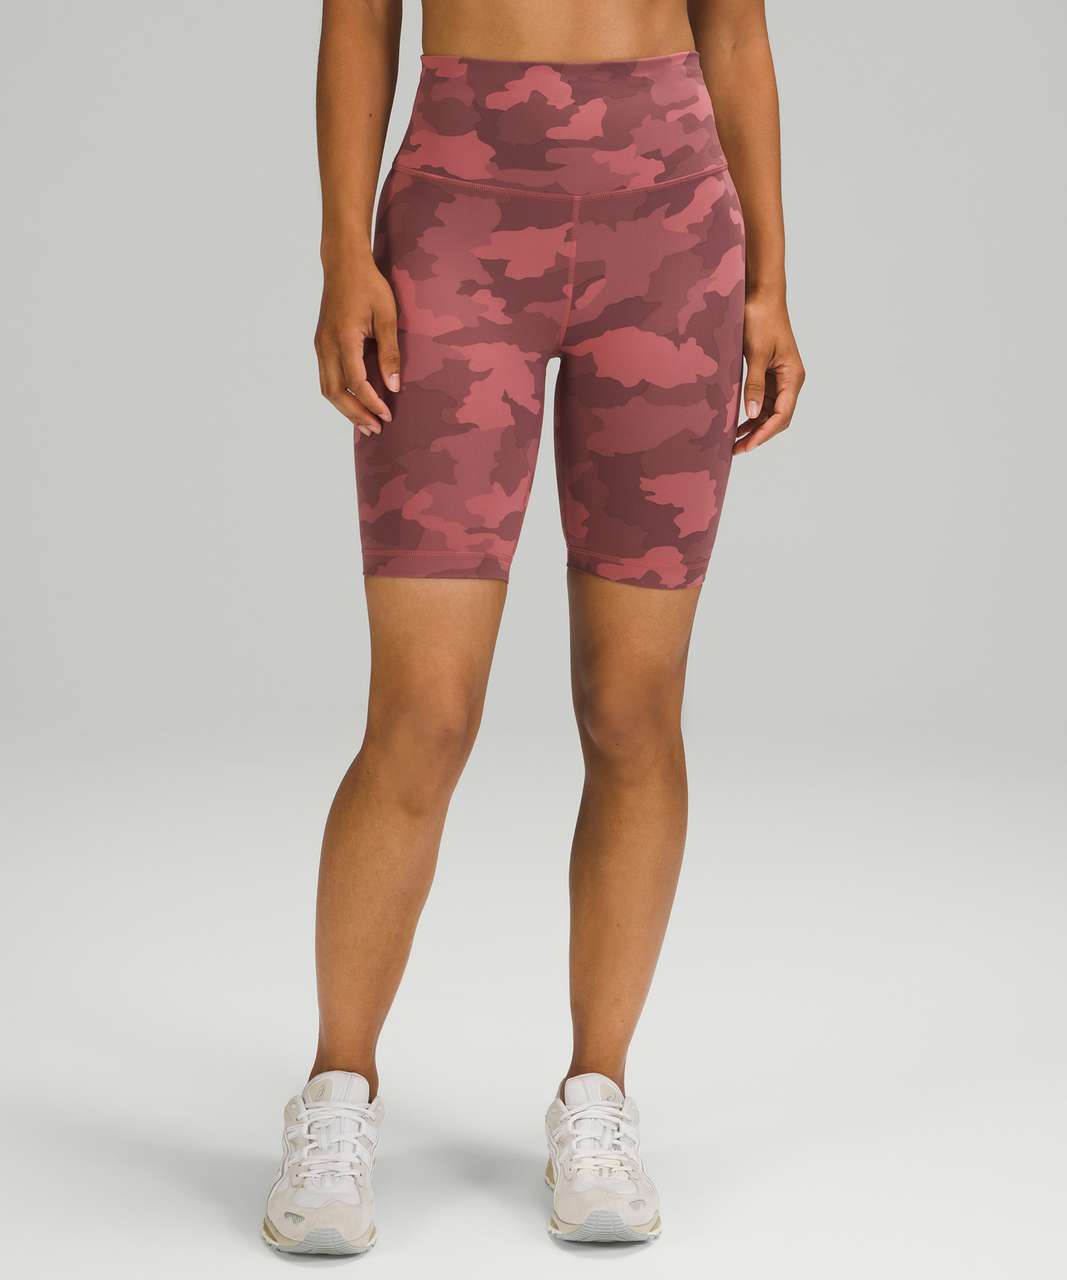 LULULEMON TRACK THAT Short 5 Size 6 Heritage 365 Camo Brier Rose New No  Tags £33.18 - PicClick UK